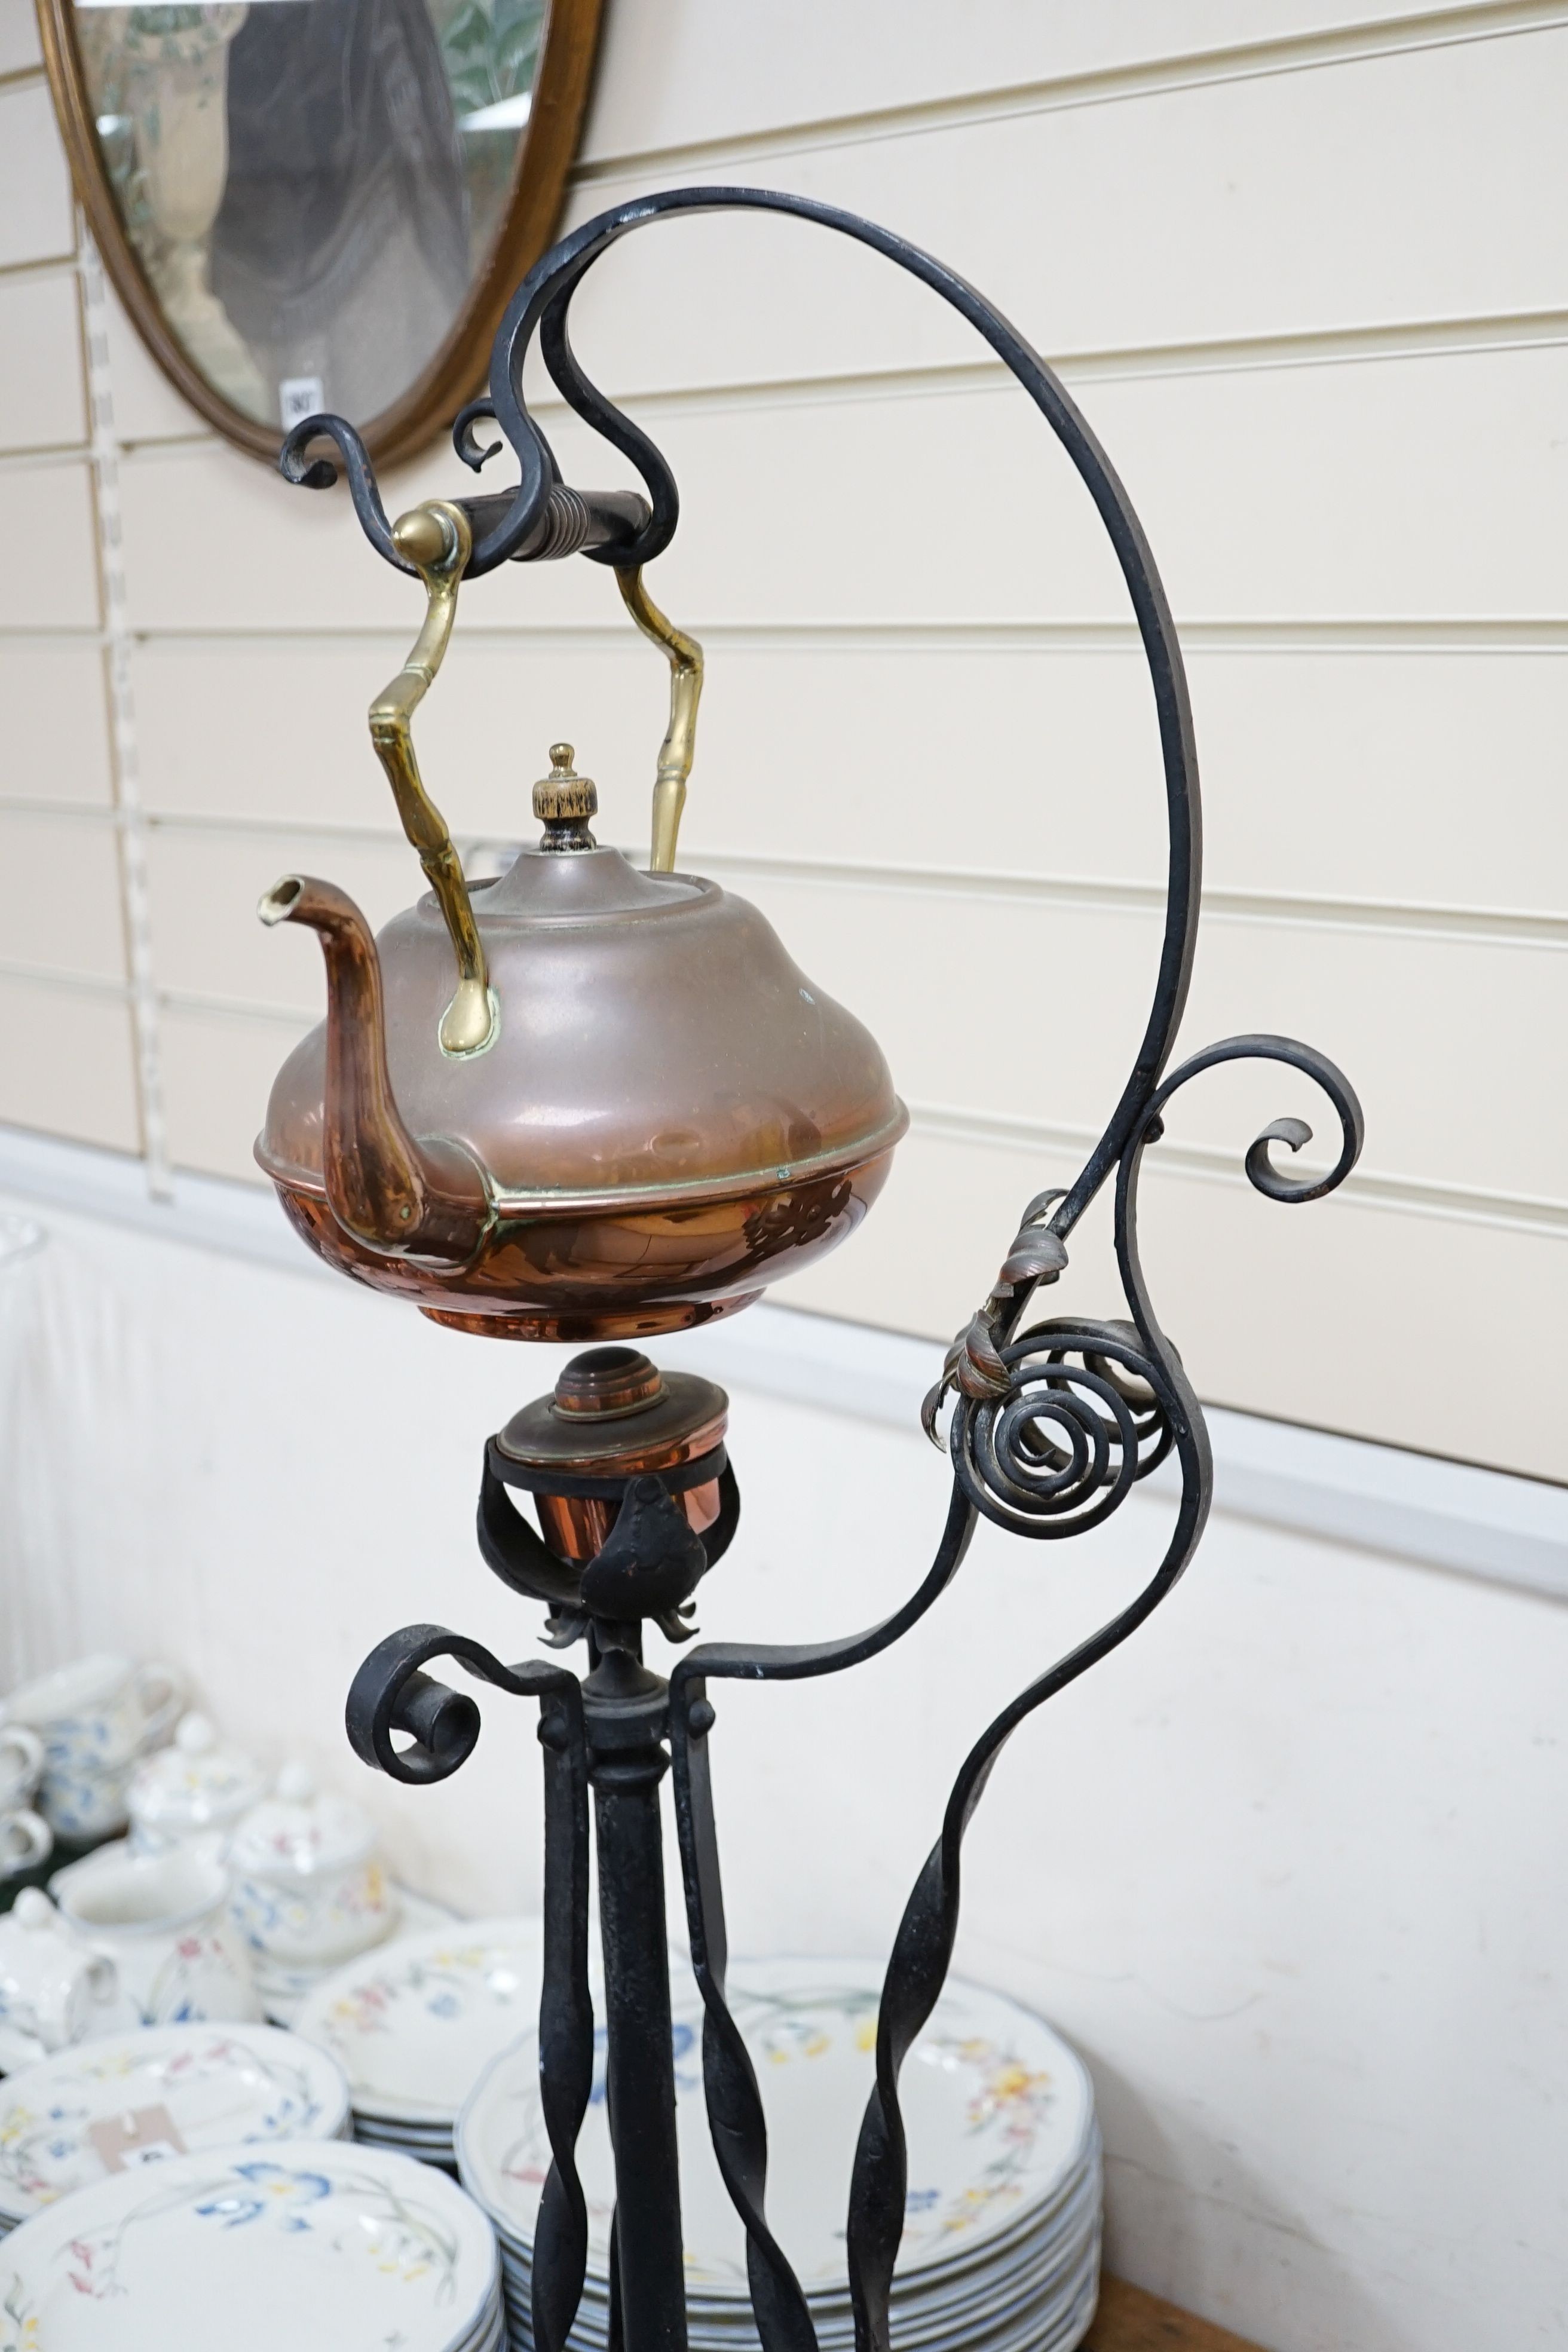 An Arts & Crafts wrought iron and copper burner stand with associated copper kettle 83cm